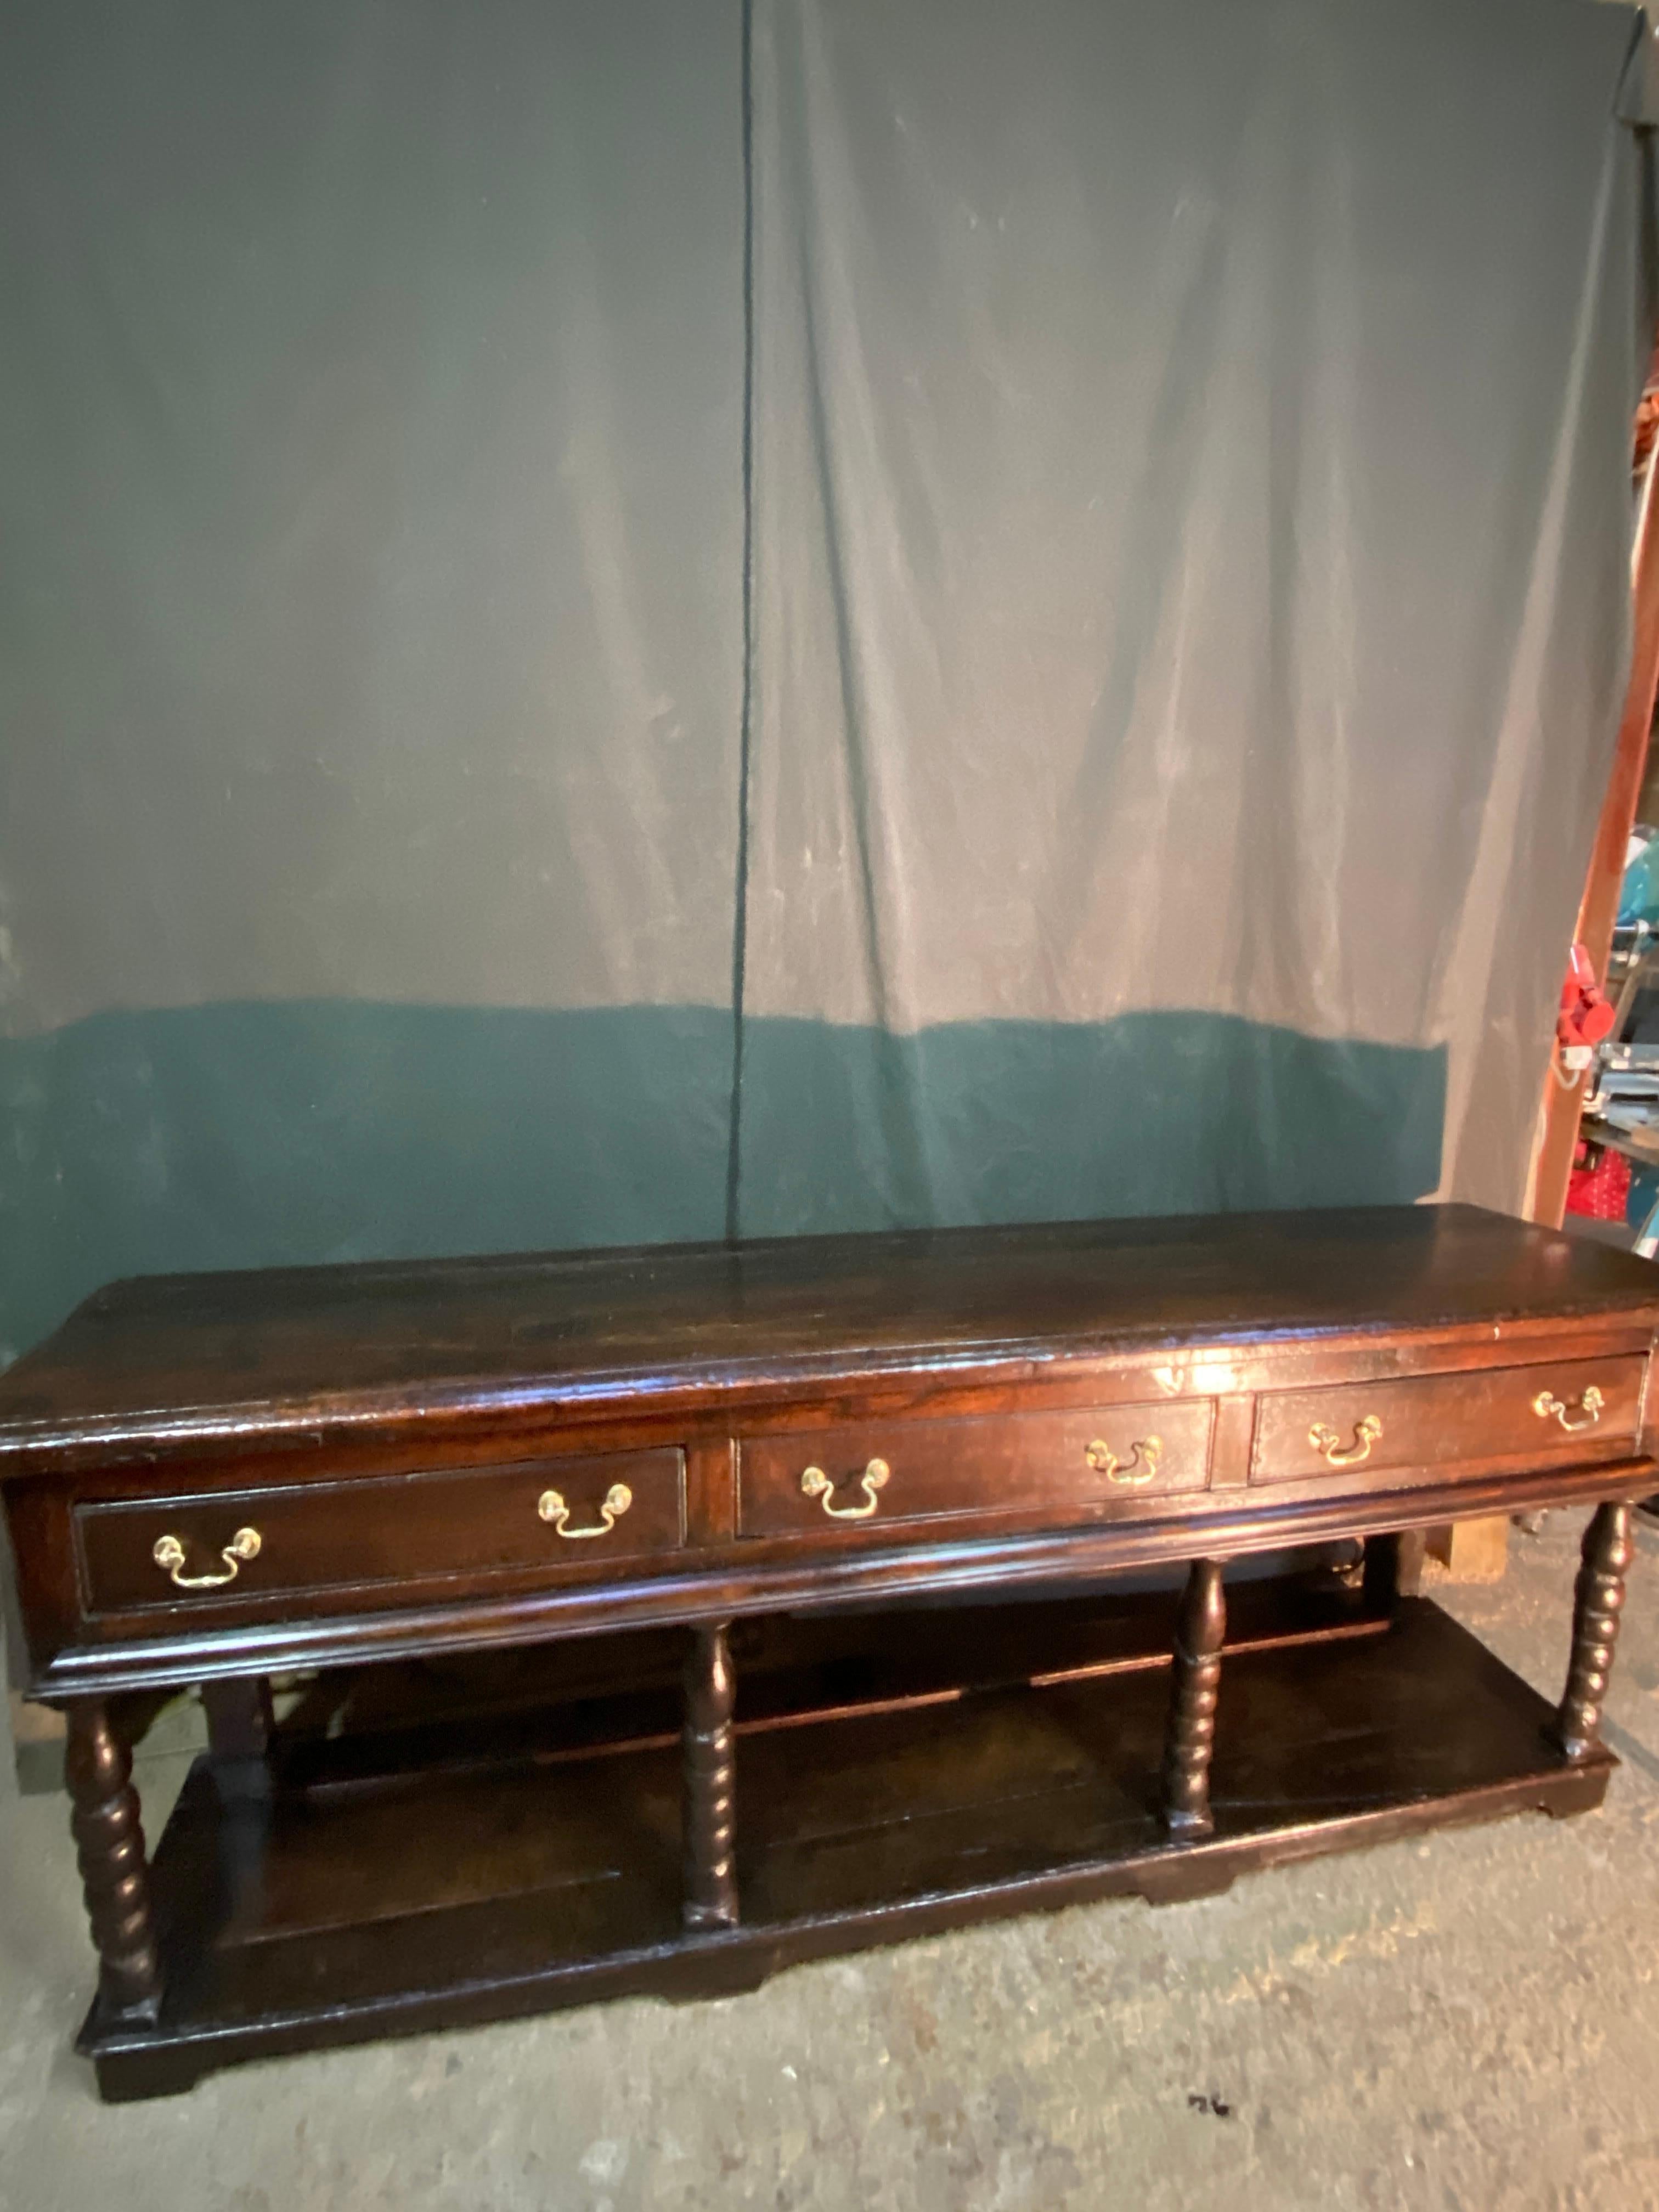 Magnificent English oak console sideboard from the 18th century opening with three drawers very nice base original brass hardware wonderful patina no restoration, immaculate condition.